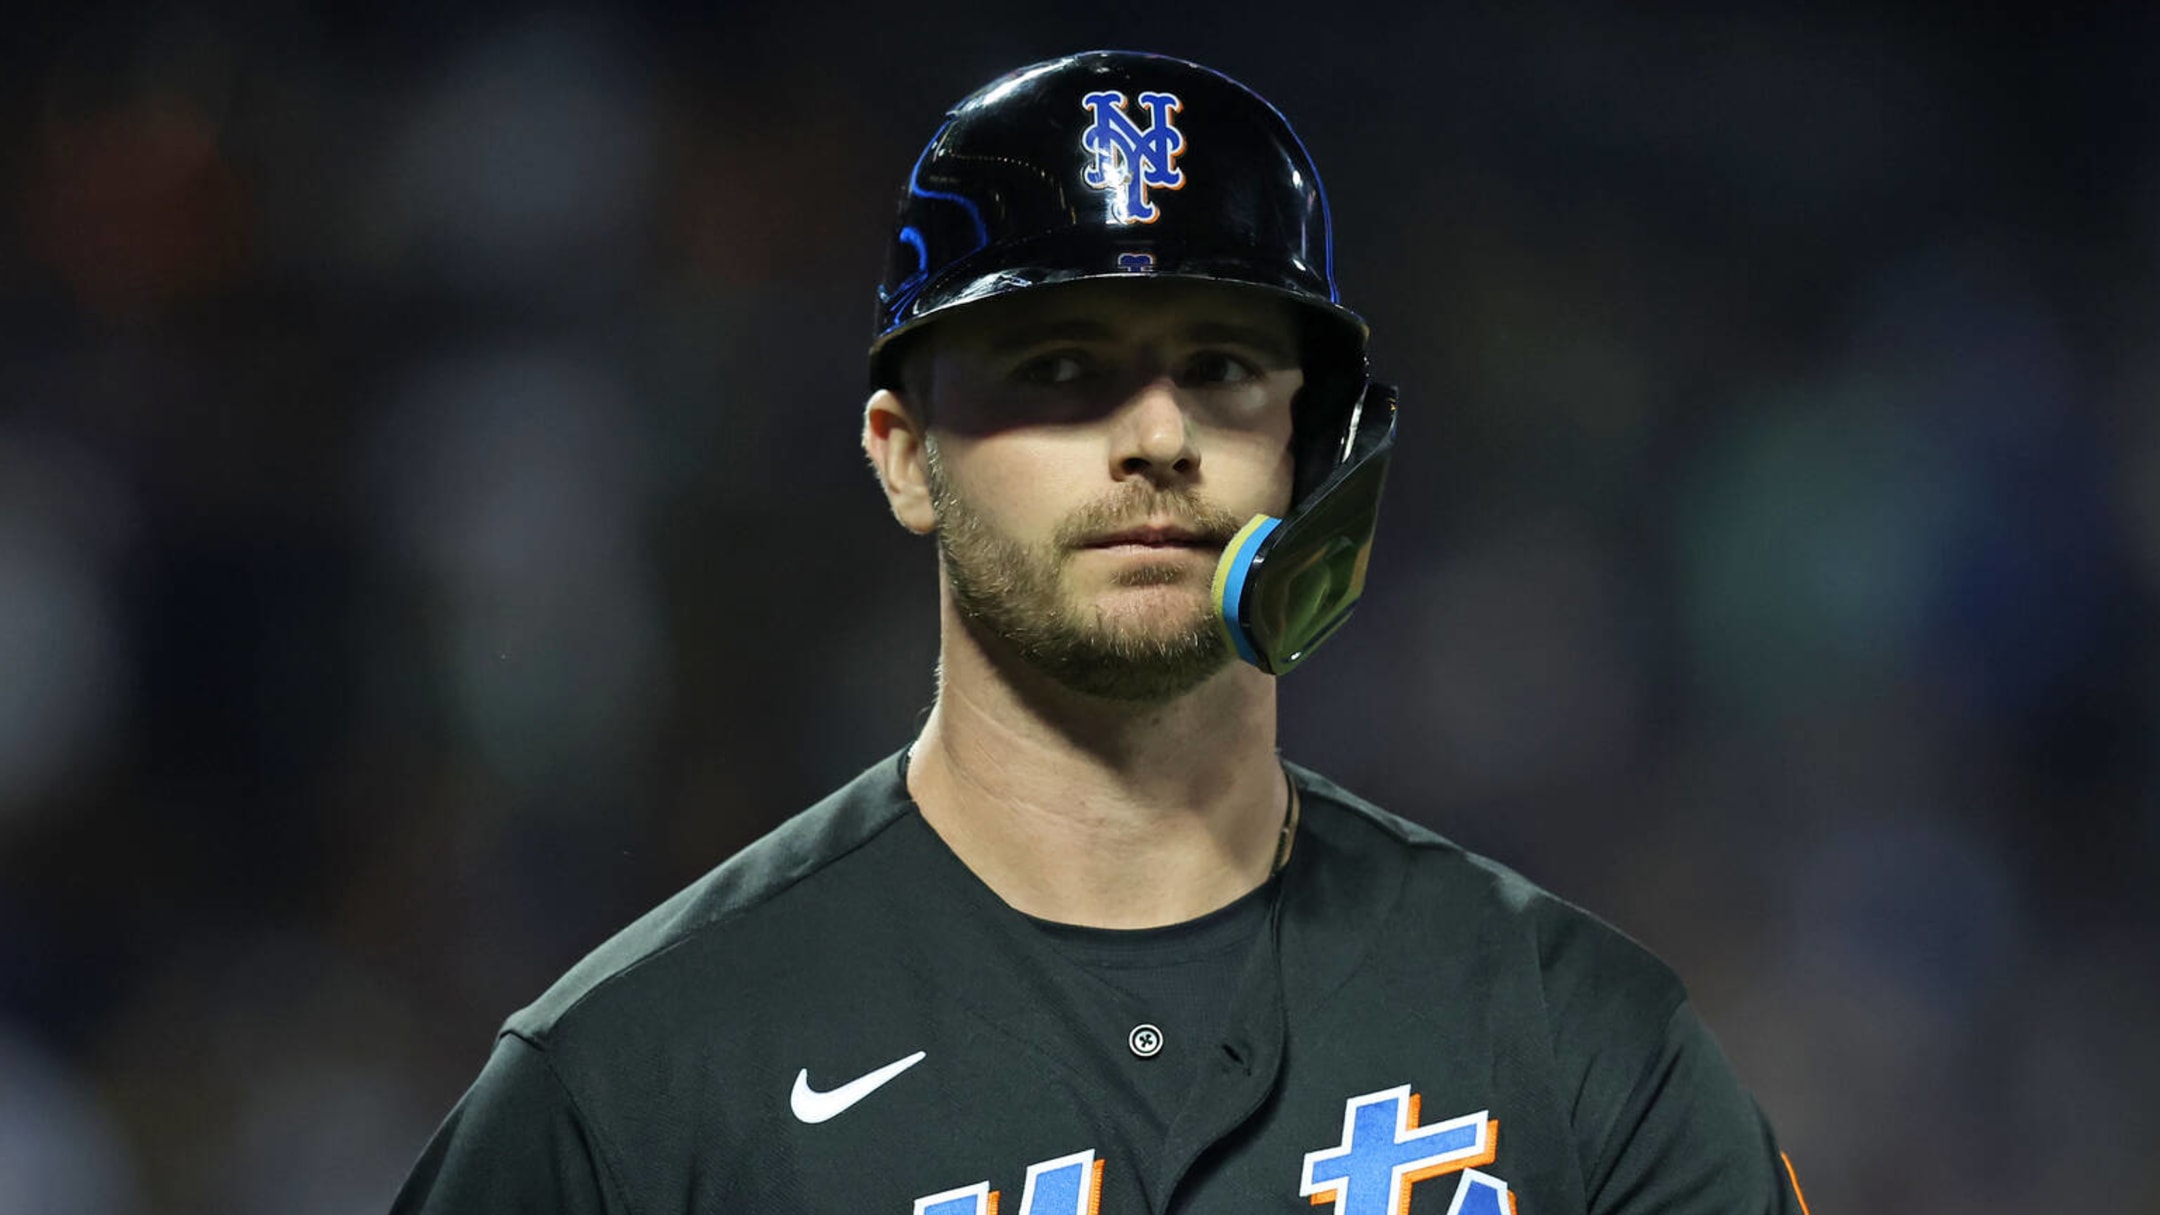 Pete Alonso hints about uncertainty amid contract rumors